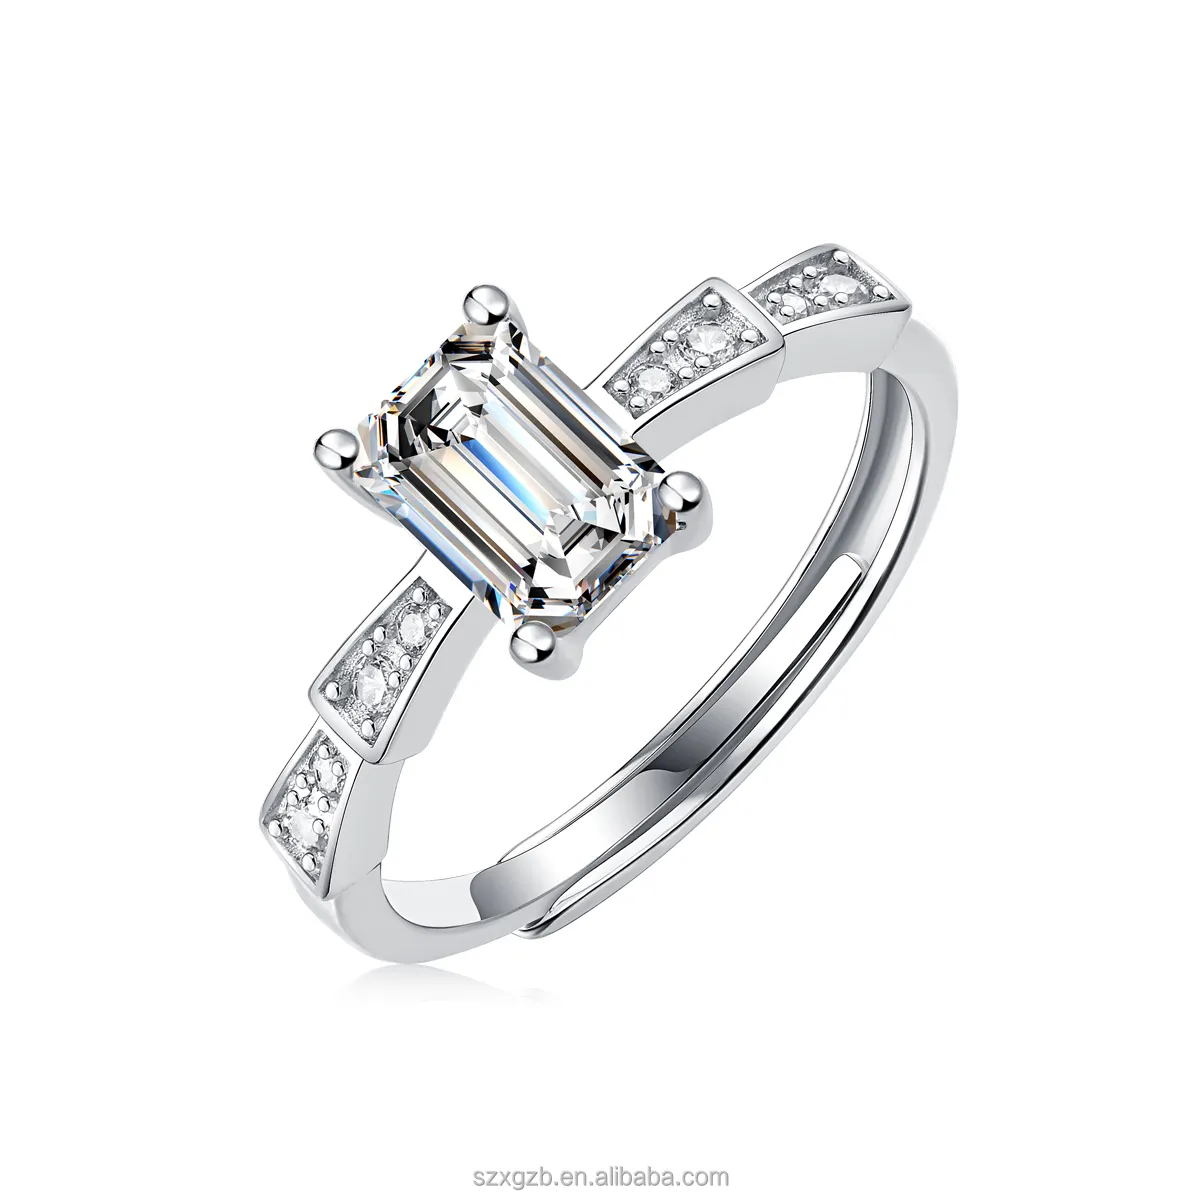 Jewelry Factory Fine Craft Wholesale Price 1ct Emerald Cut 925 Sterling Silver Inlaid Adjustable Moissanite Diamond Ring